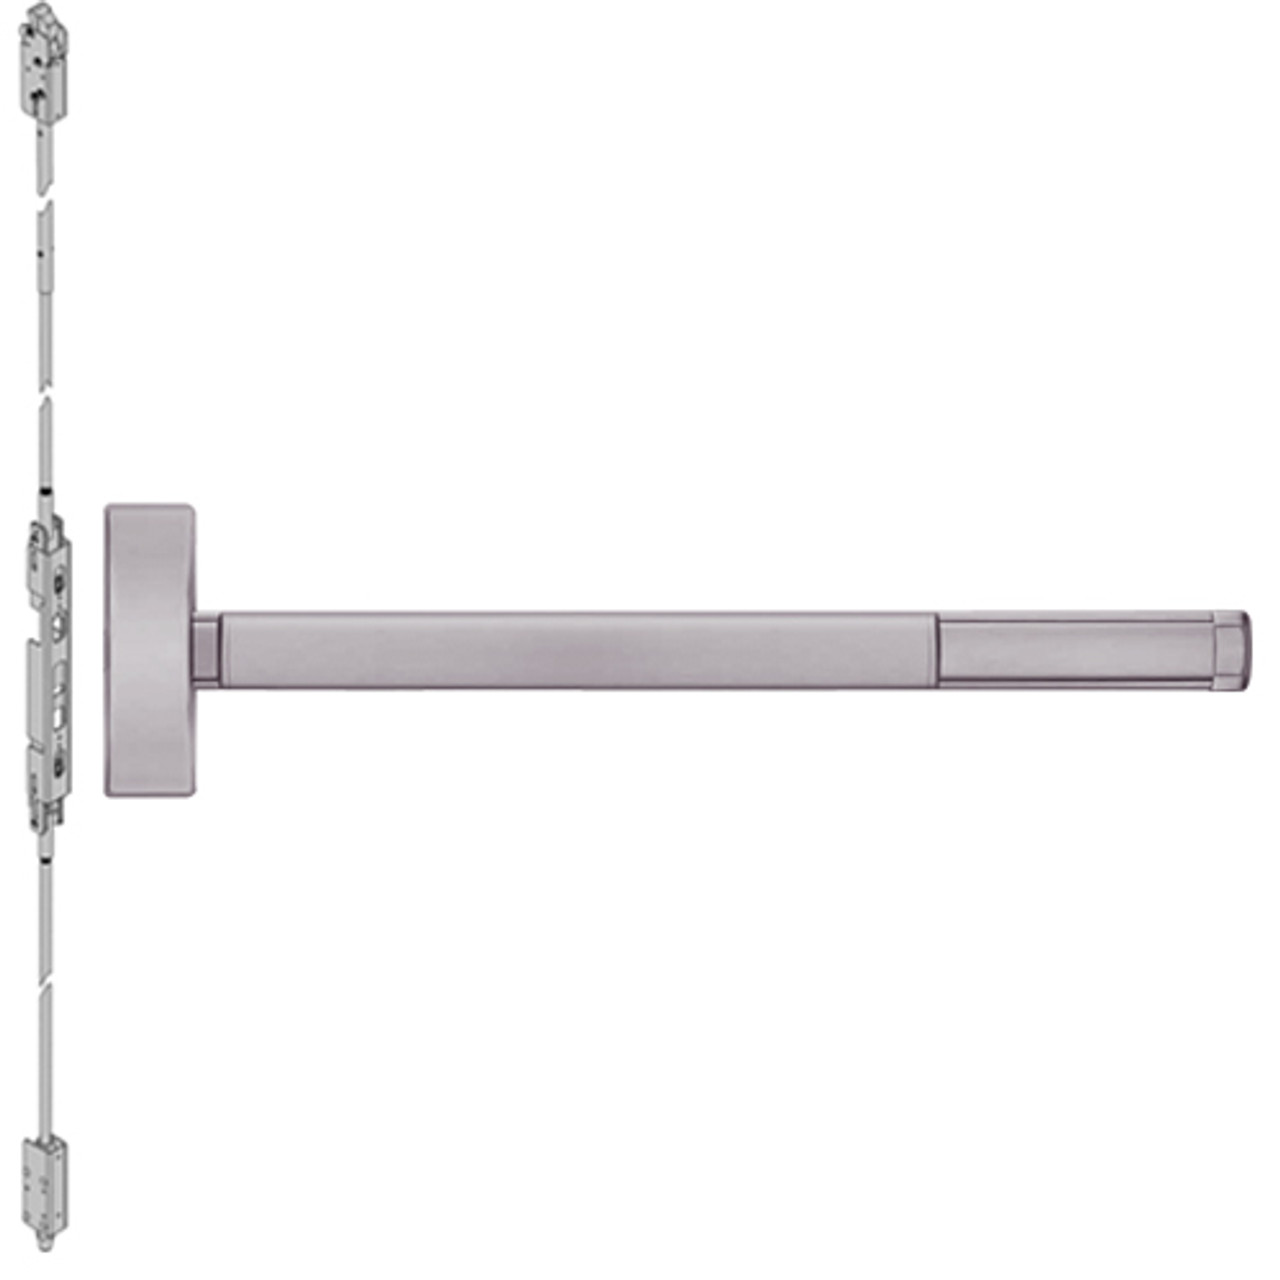 DEFL2802LBR-630-36 PHI 2800 Series Fire Rated Concealed Vertical Rod Exit Device with Delayed Egress Prepped for Dummy Trim in Satin Stainless Steel Finish